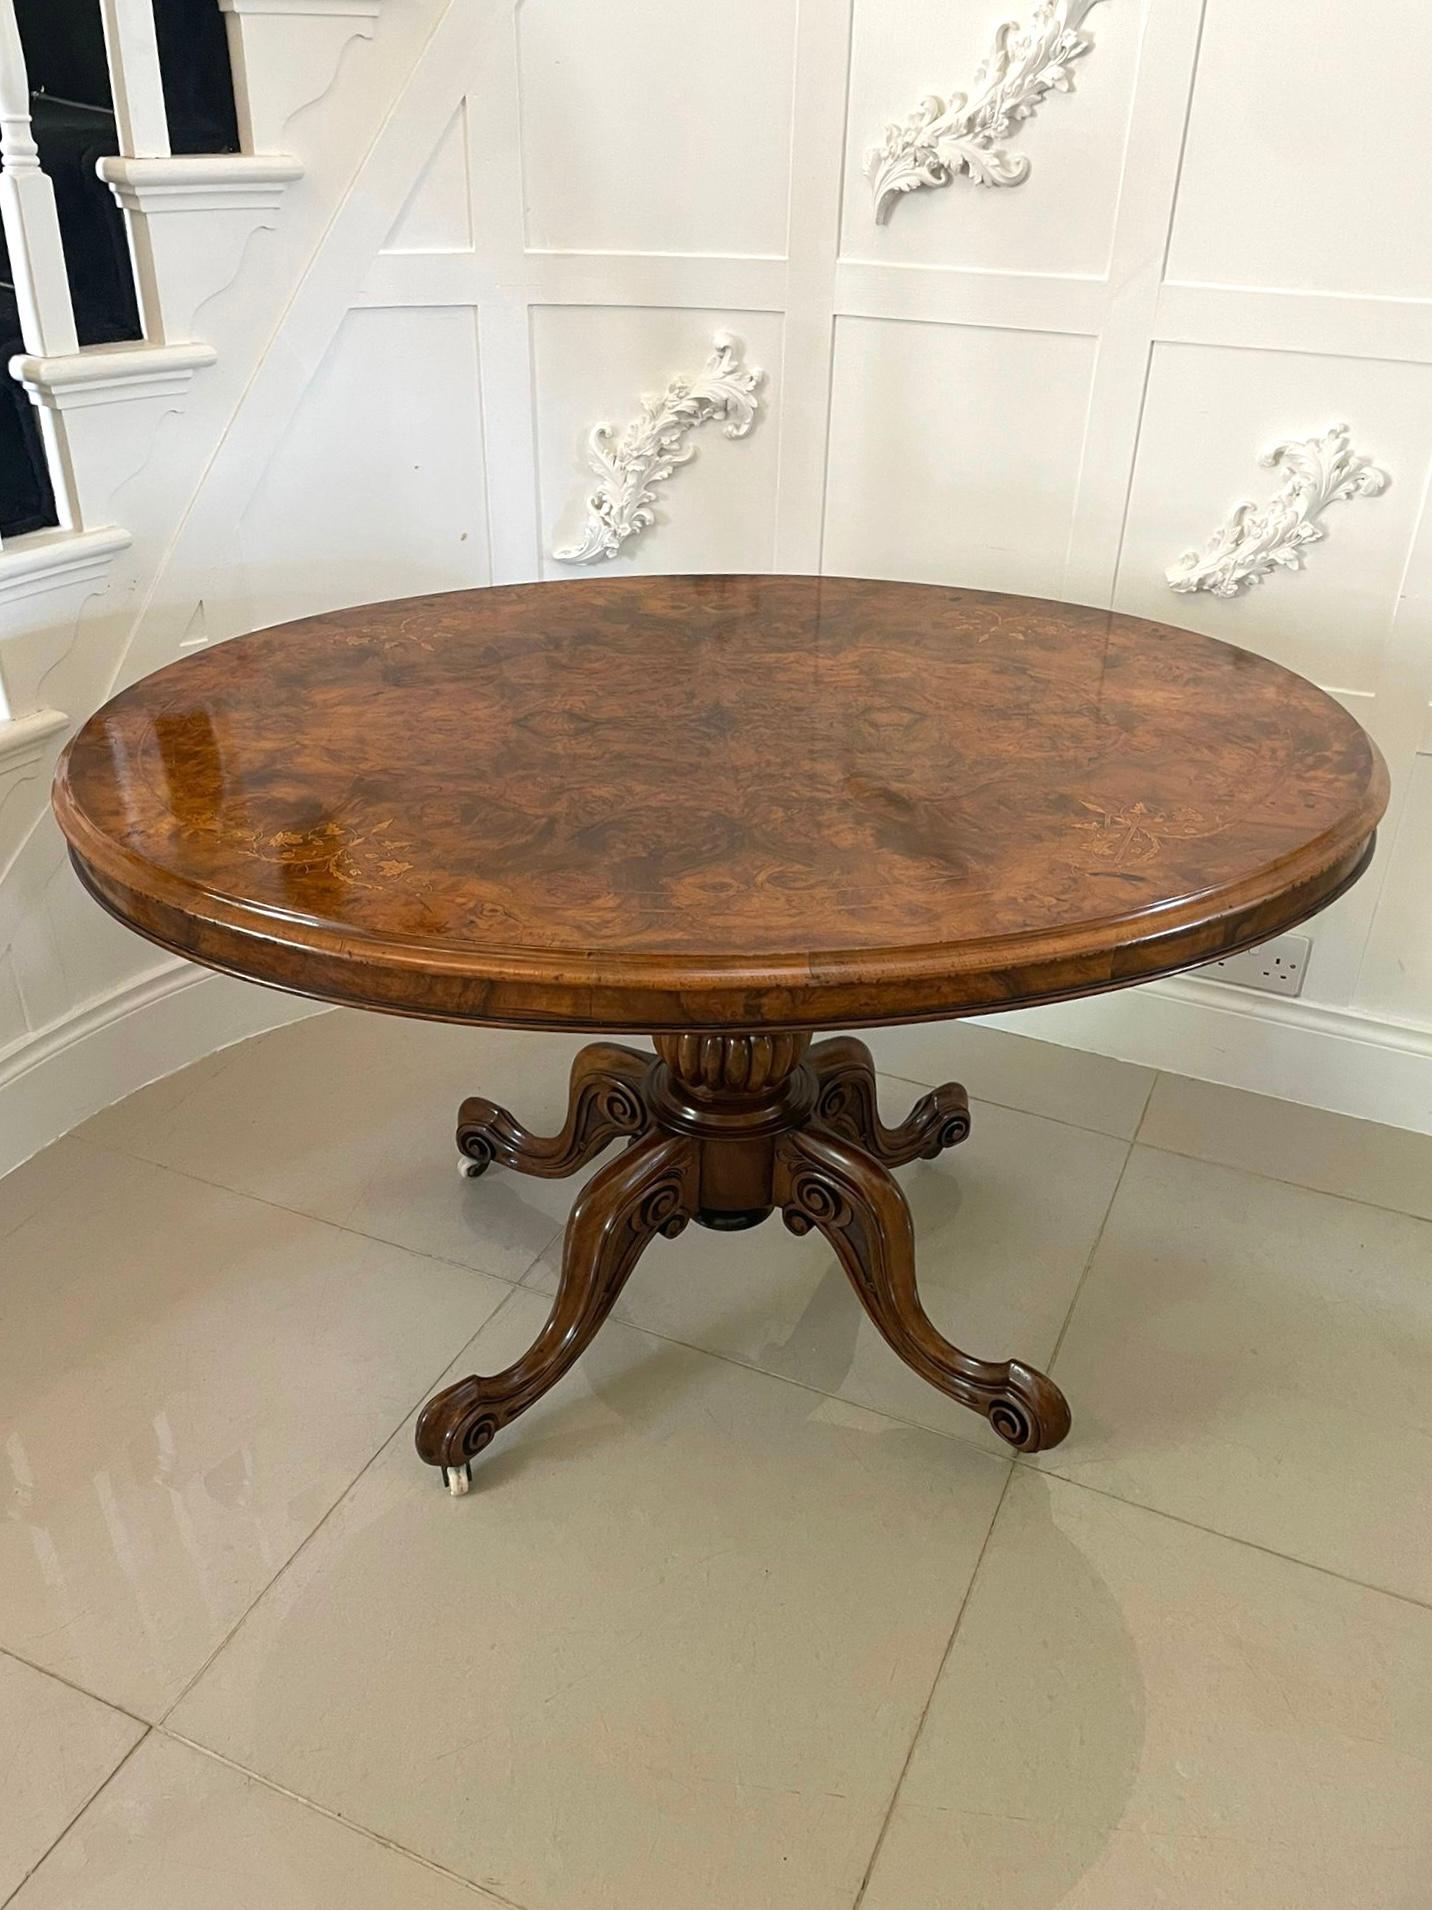 Fine quality antique Victorian oval inlaid burr walnut centre table having a fine quality attractive burr walnut oval tilt top table with pretty satinwood inlay and a thumb moulded edge supported on a shaped turned carved pedestal column standing on